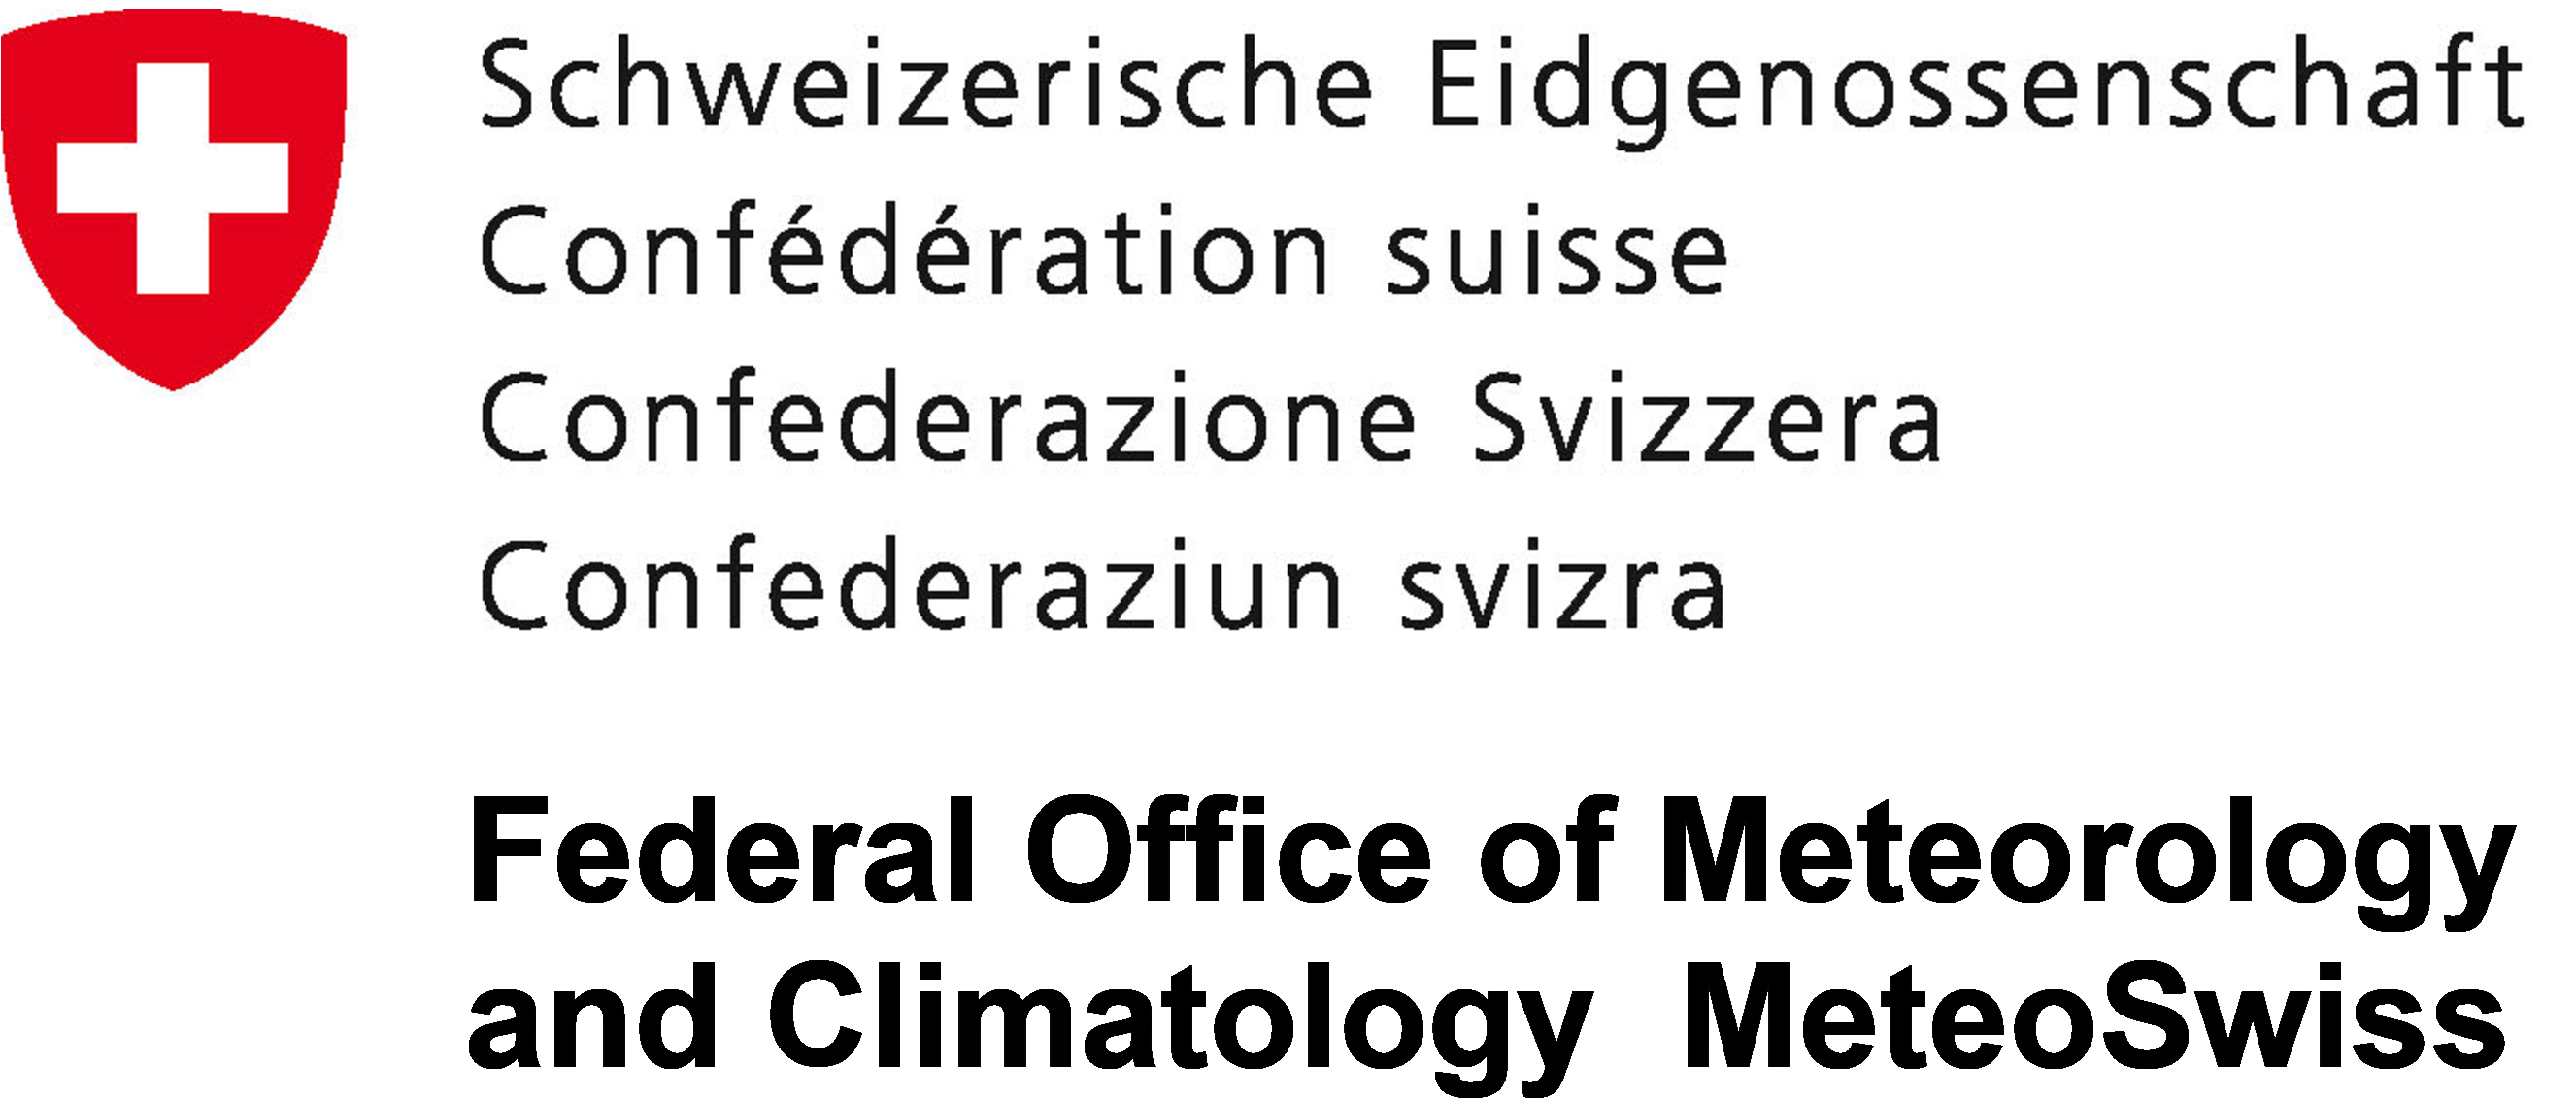 Federal Office of Meteorology and Climatology Meteo Swiss